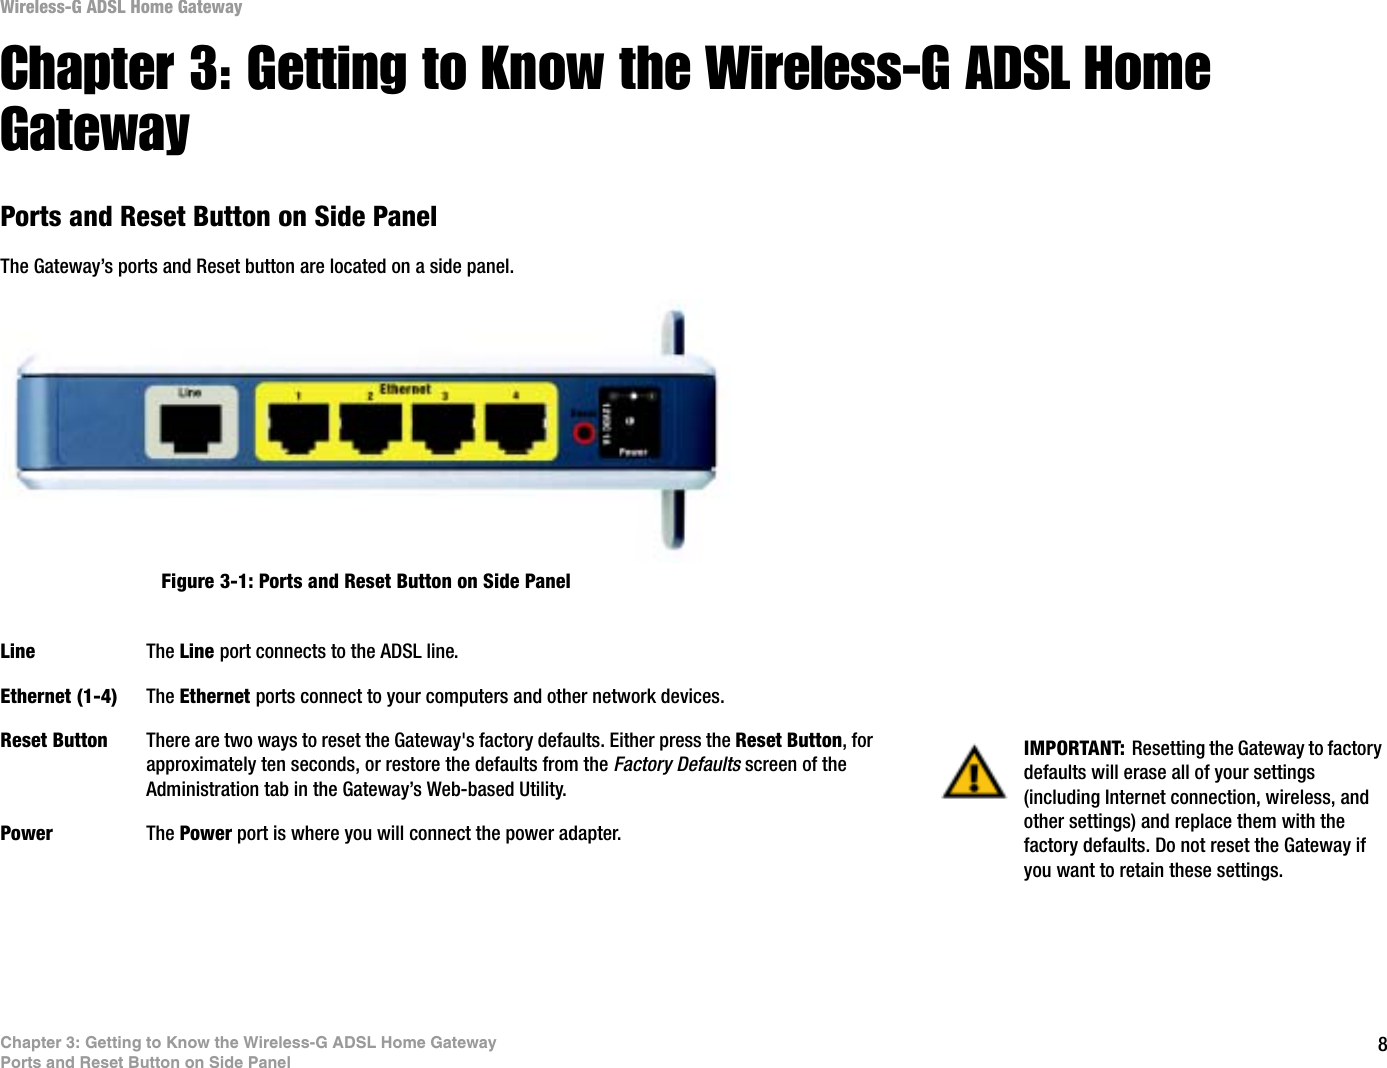 8Chapter 3: Getting to Know the Wireless-G ADSL Home GatewayPorts and Reset Button on Side PanelWireless-G ADSL Home GatewayChapter 3: Getting to Know the Wireless-G ADSL Home GatewayPorts and Reset Button on Side PanelThe Gateway’s ports and Reset button are located on a side panel.Line The Line port connects to the ADSL line.Ethernet (1-4) The Ethernet ports connect to your computers and other network devices.Reset Button There are two ways to reset the Gateway&apos;s factory defaults. Either press the Reset Button, for approximately ten seconds, or restore the defaults from the Factory Defaults screen of the Administration tab in the Gateway’s Web-based Utility.Power The Power port is where you will connect the power adapter.IMPORTANT: Resetting the Gateway to factory defaults will erase all of your settings (including Internet connection, wireless, and other settings) and replace them with the factory defaults. Do not reset the Gateway if you want to retain these settings.Figure 3-1: Ports and Reset Button on Side Panel